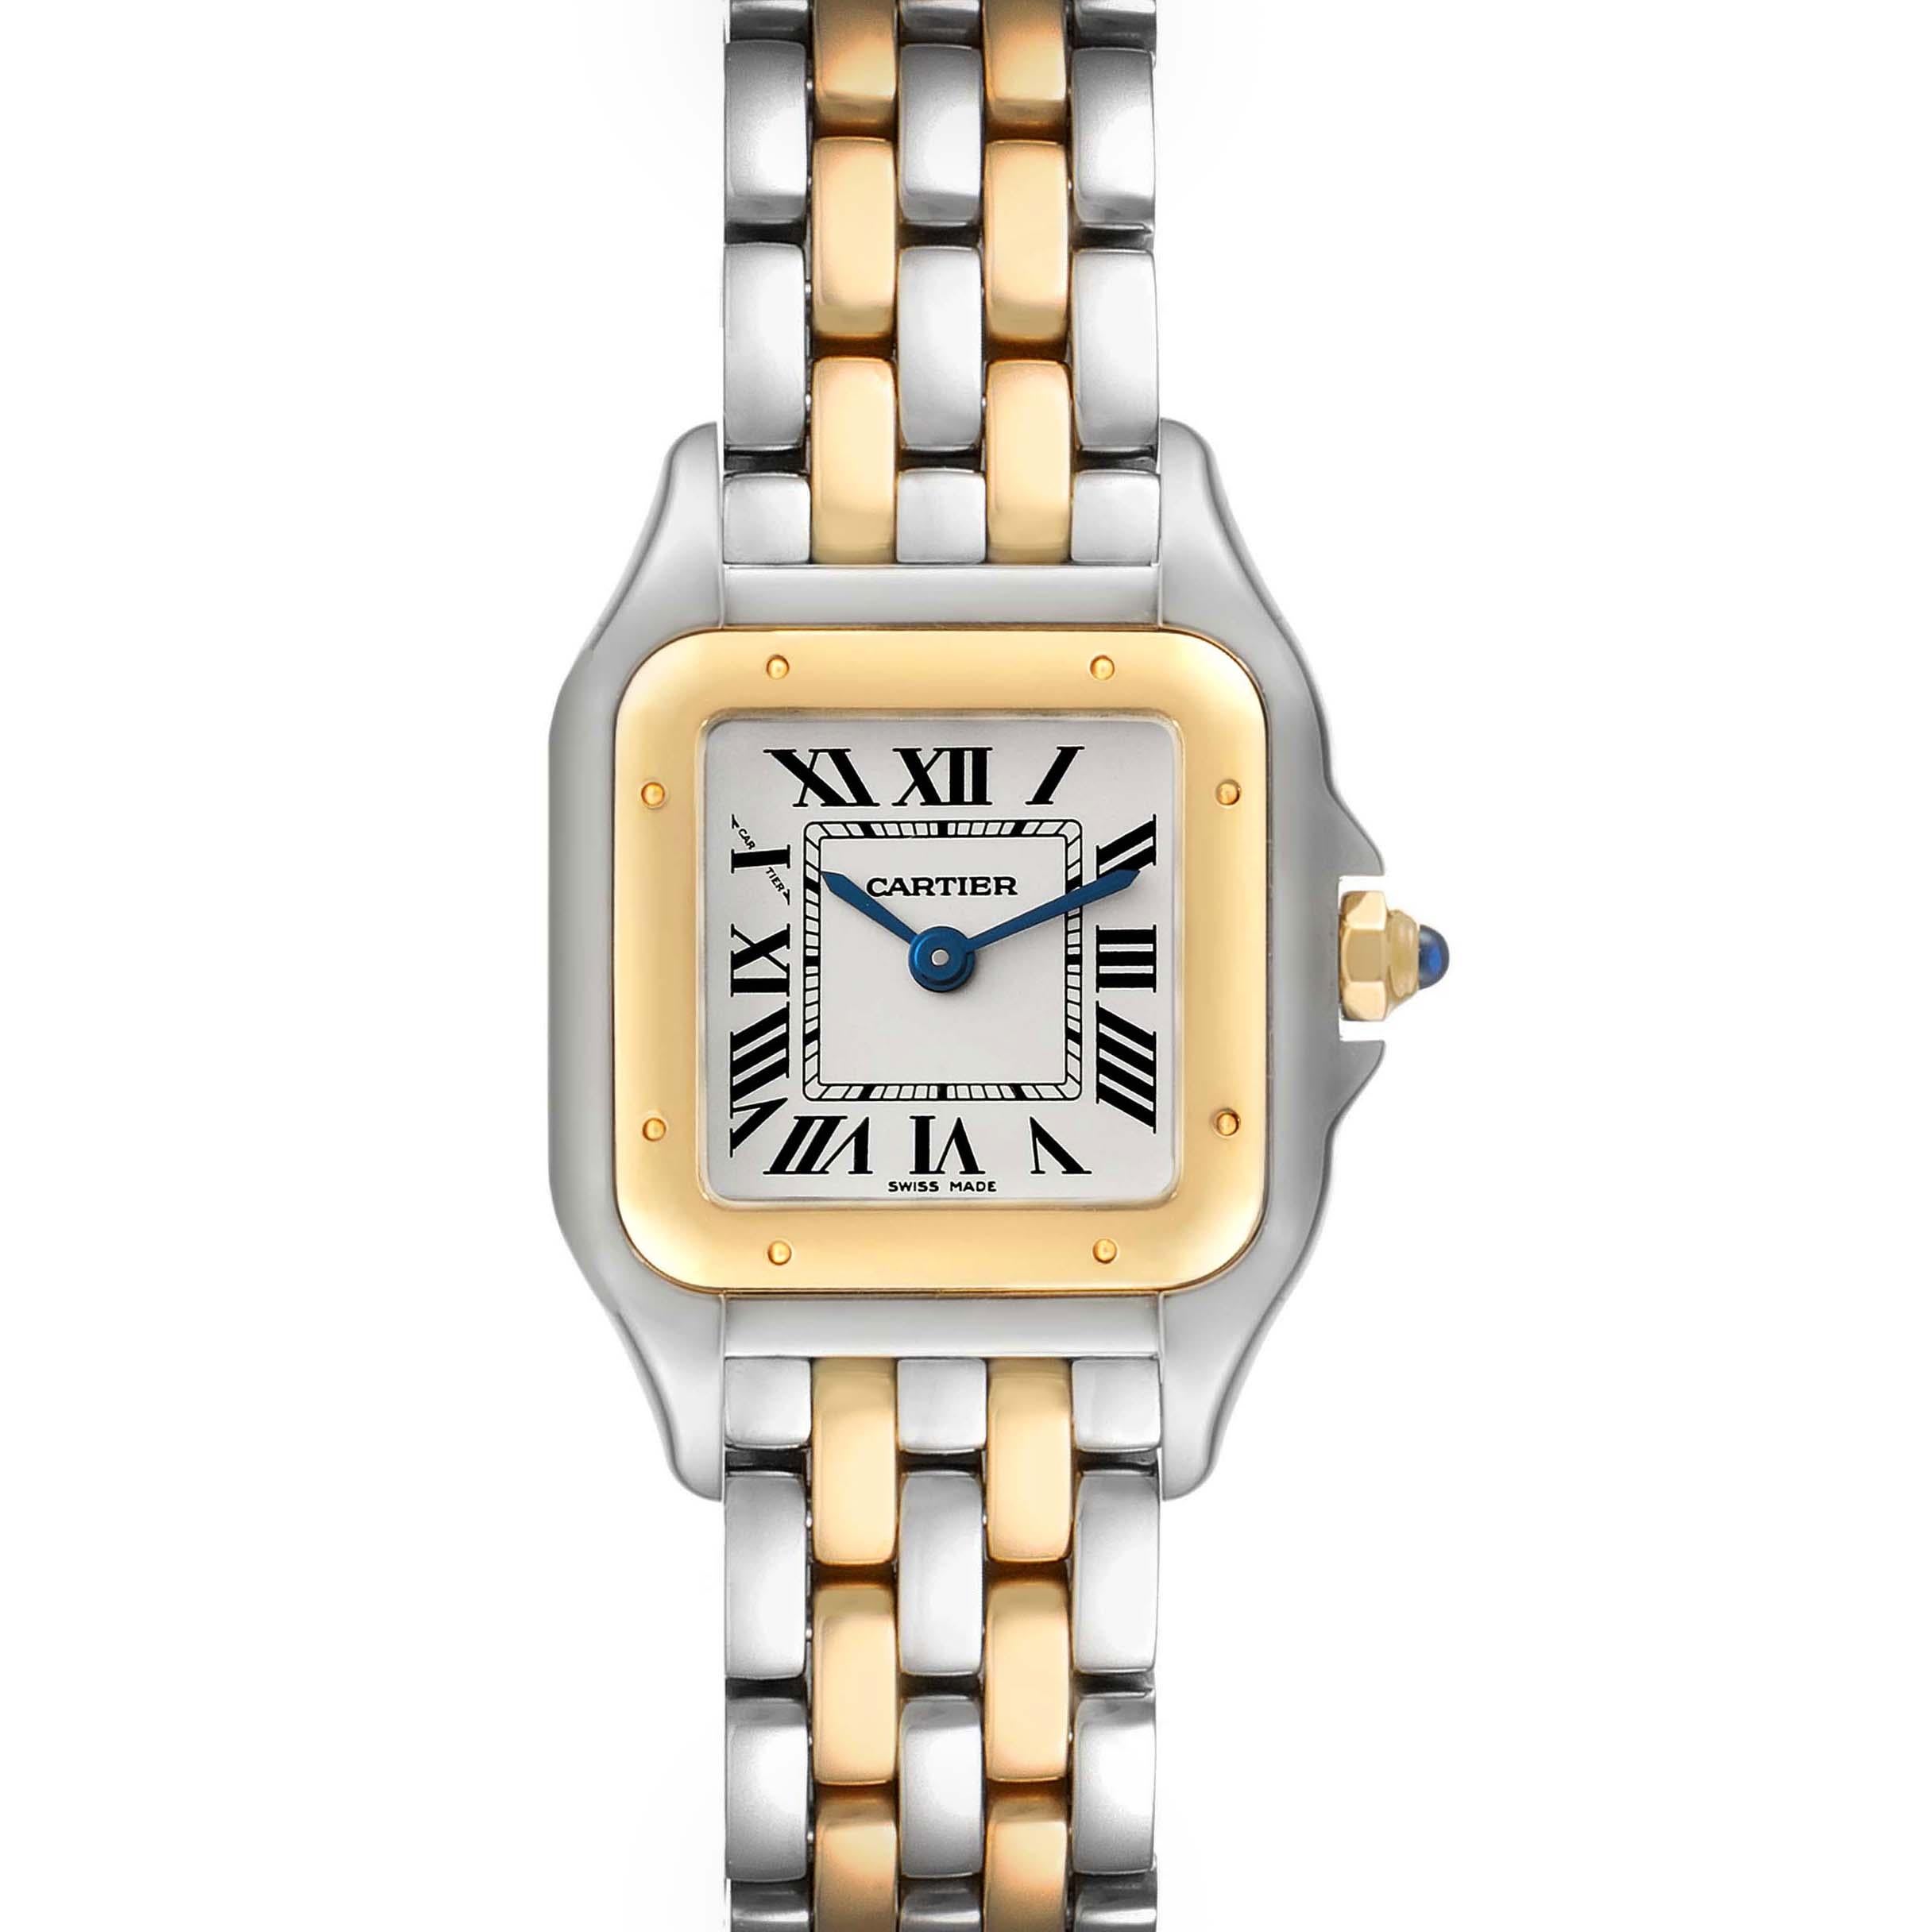 Cartier Panthere Steel Yellow Gold 2 Row Ladies Watch W2PN0006 Card. Quartz movement. Stainless steel case 22.0 x 22.0 mm. Octagonal crown set with the blue spinel cabochon. 18K yellow gold bezel, secured with 8 stainless steel pins. Scratch